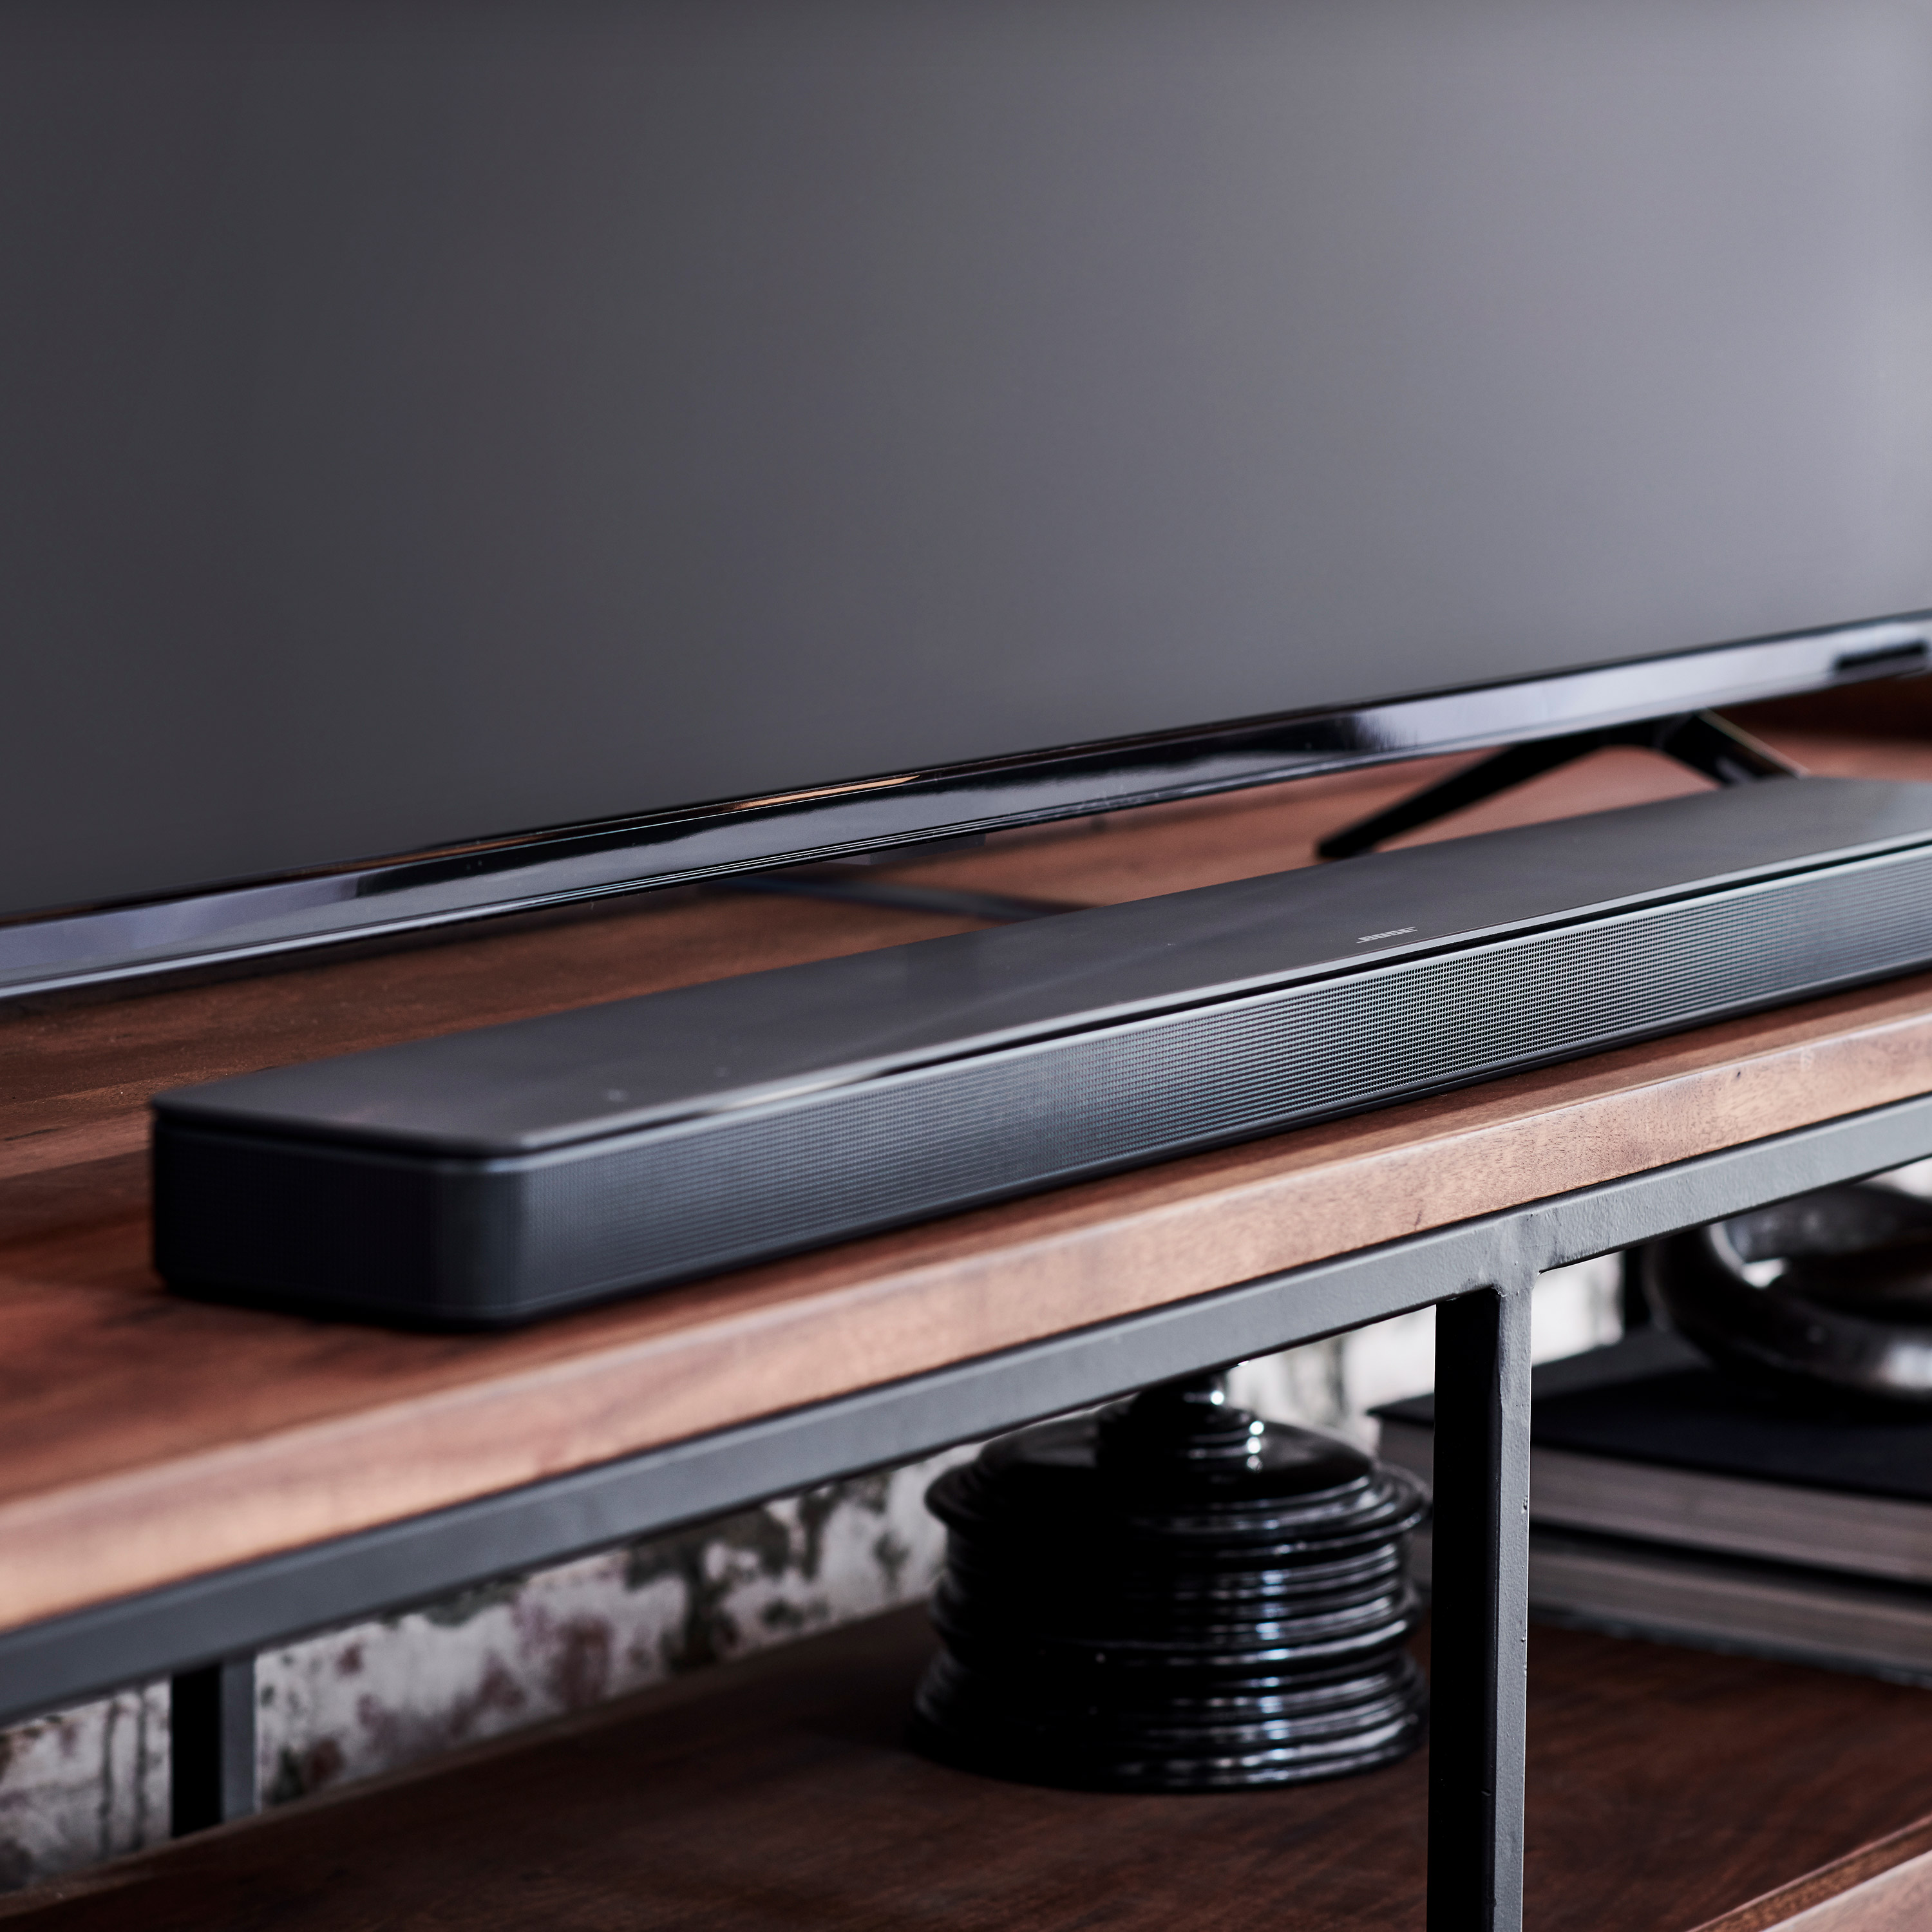 Product image of the Bose Souundbar 500 from Bose press release. The soundbar sits ona wood TV stand with a TV above it.